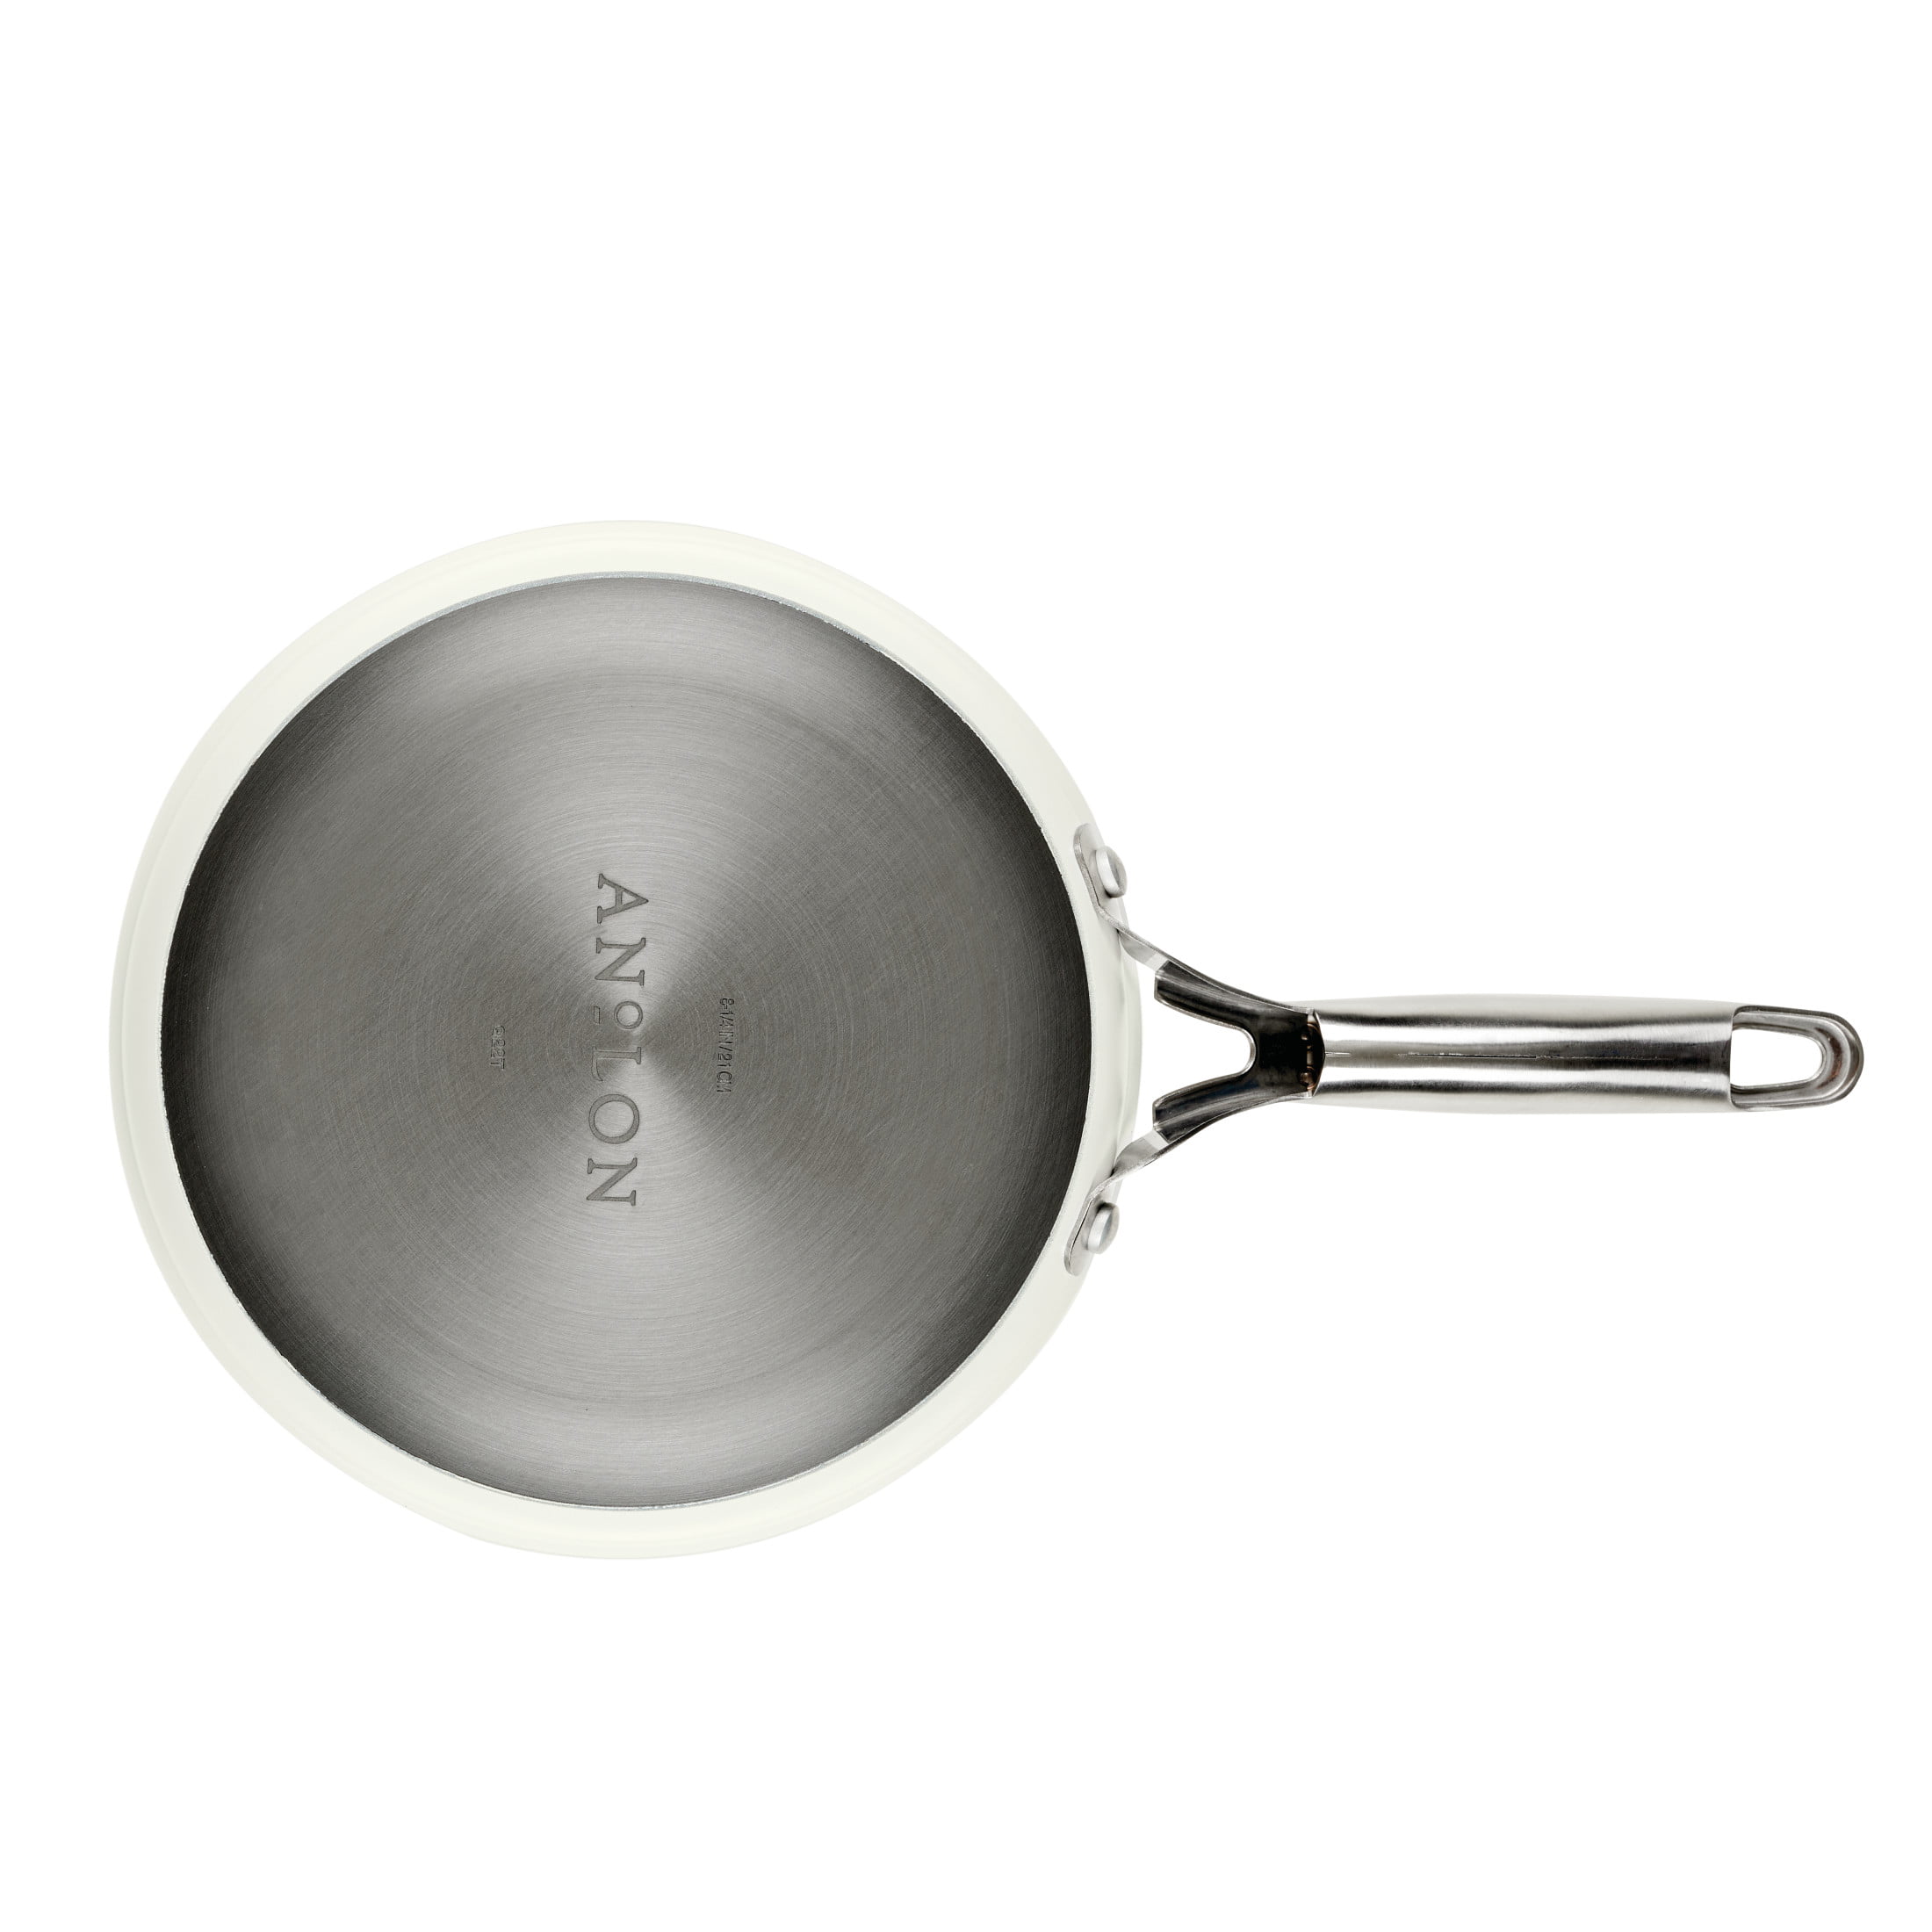 12-Inch Hard Anodized Nonstick Deep Frying Pan with Lid – Anolon